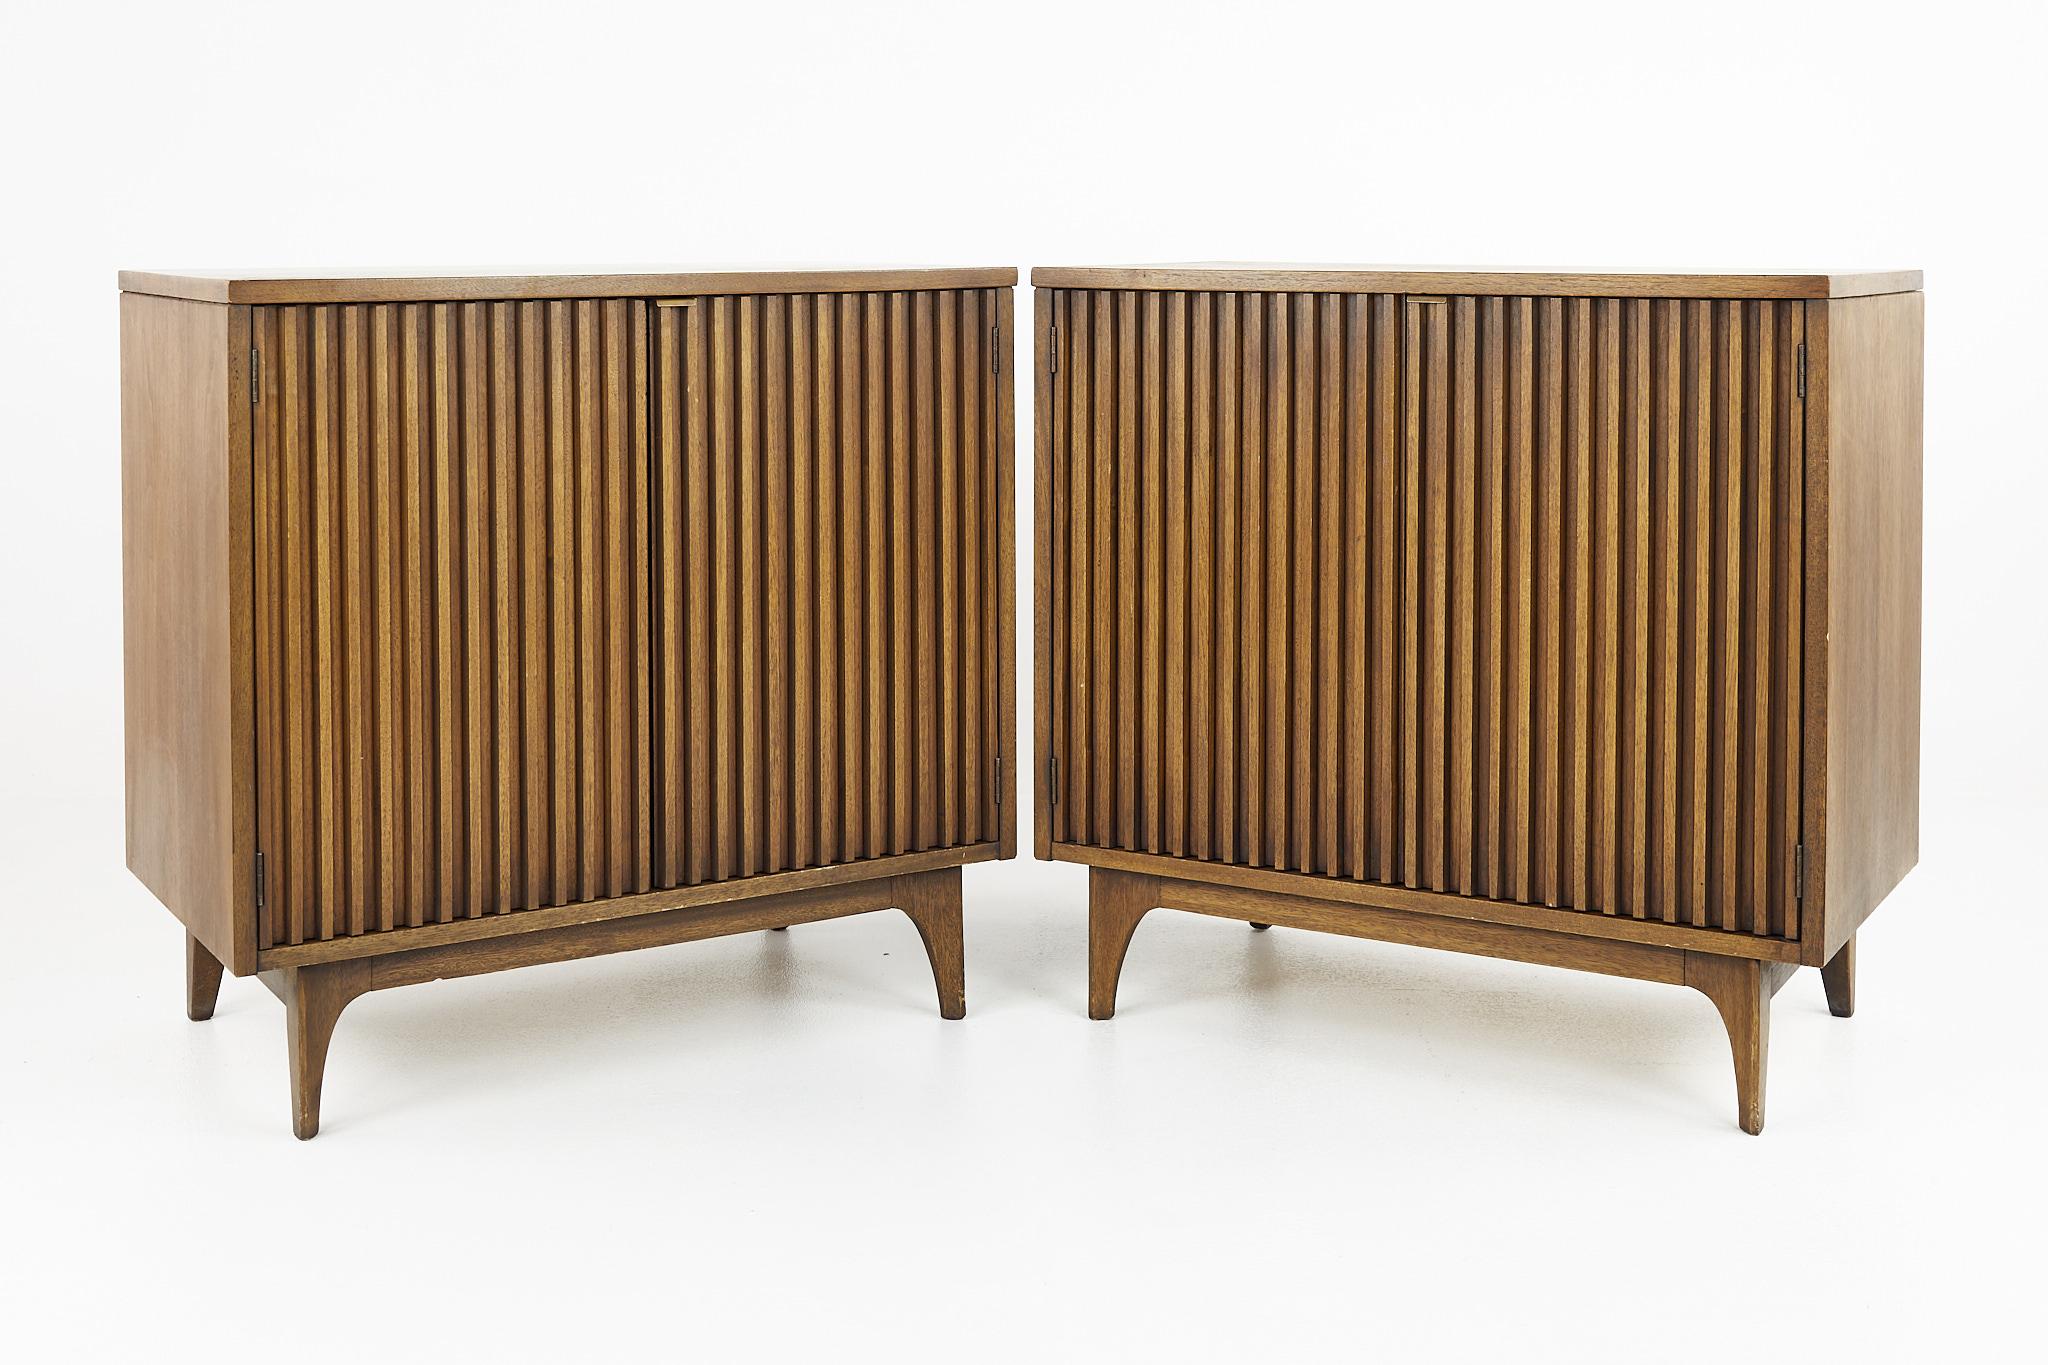 Broyhill Brasilia mid century louvered commode nightstands - pair

These nightstands measure: 30.75 wide x 17 deep x 29.75 inches high

?All pieces of furniture can be had in what we call restored vintage condition. That means the piece is